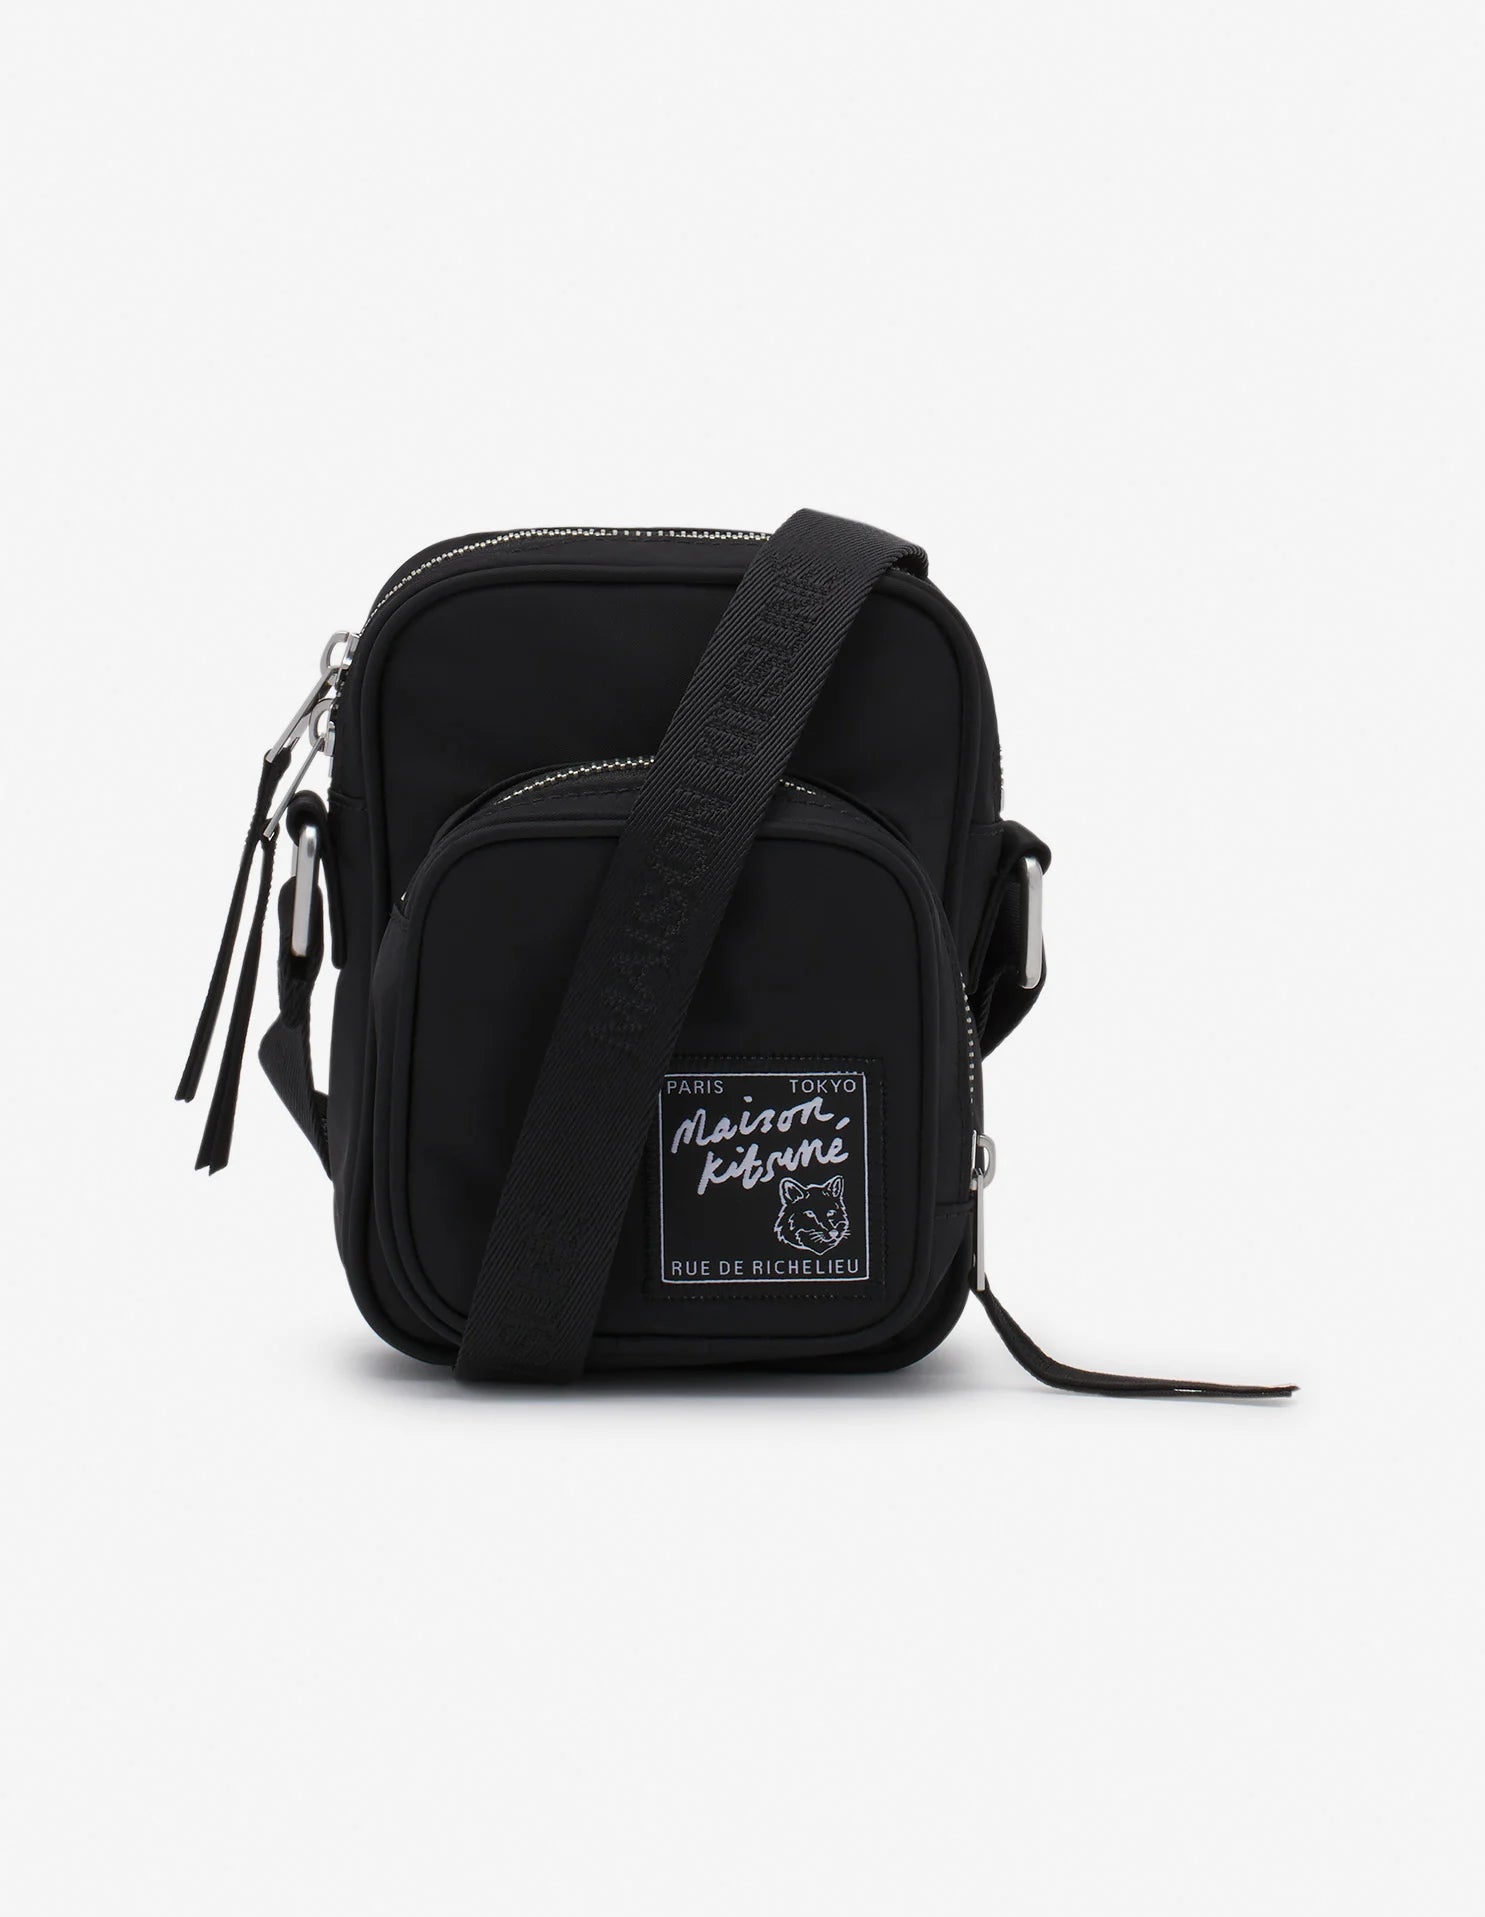 THE TRAVELLER CROSSBODY POUCH